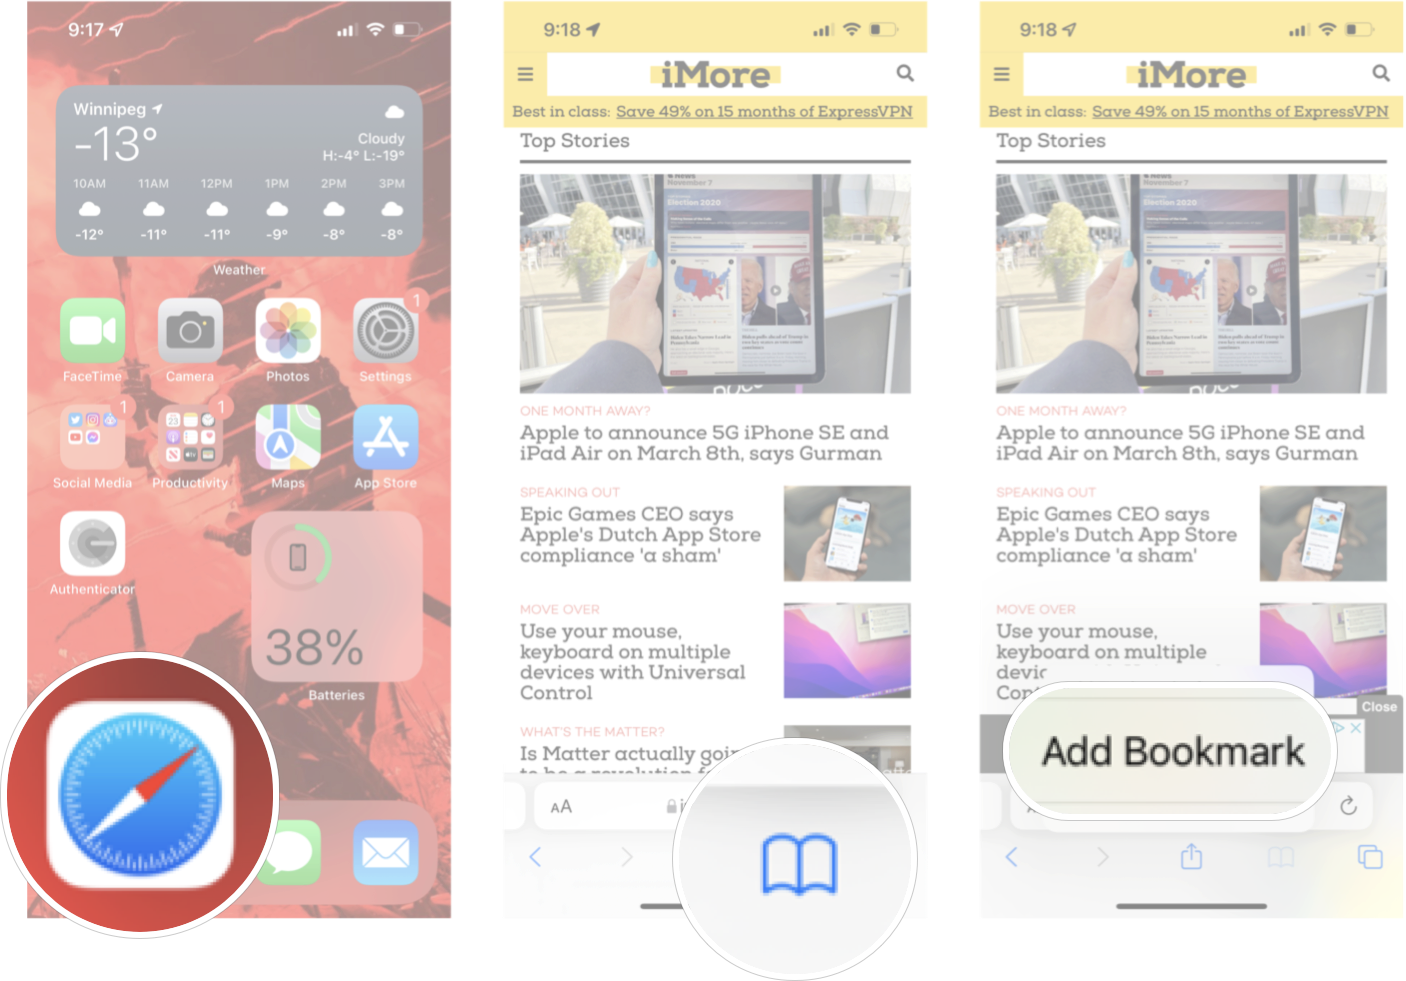 How To Add Bookmark In Safari on iPhone: Launc hSafari, navigate to the websire you want to bookmark, long press the bookmark button, and then tap add bookmark.